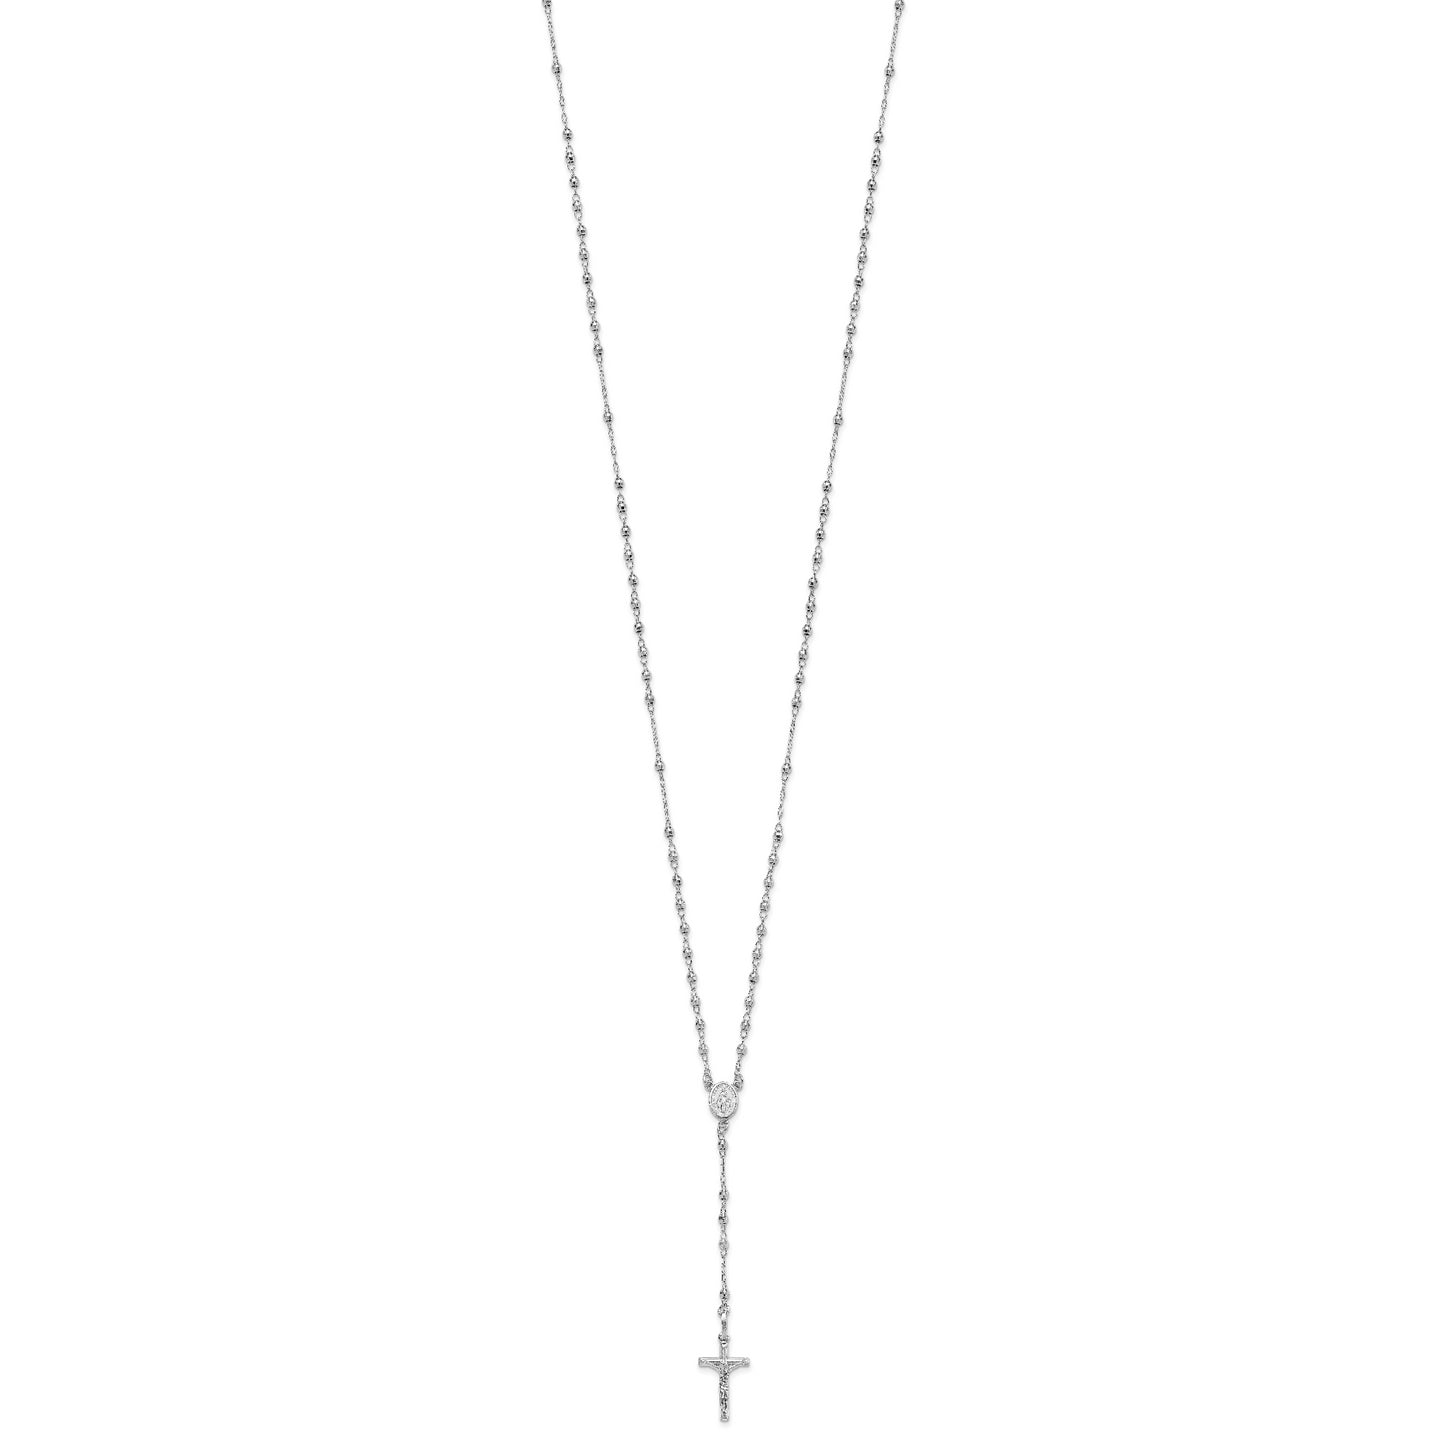 14K White Gold Polished Faceted Beads Rosary 18 inch Necklace